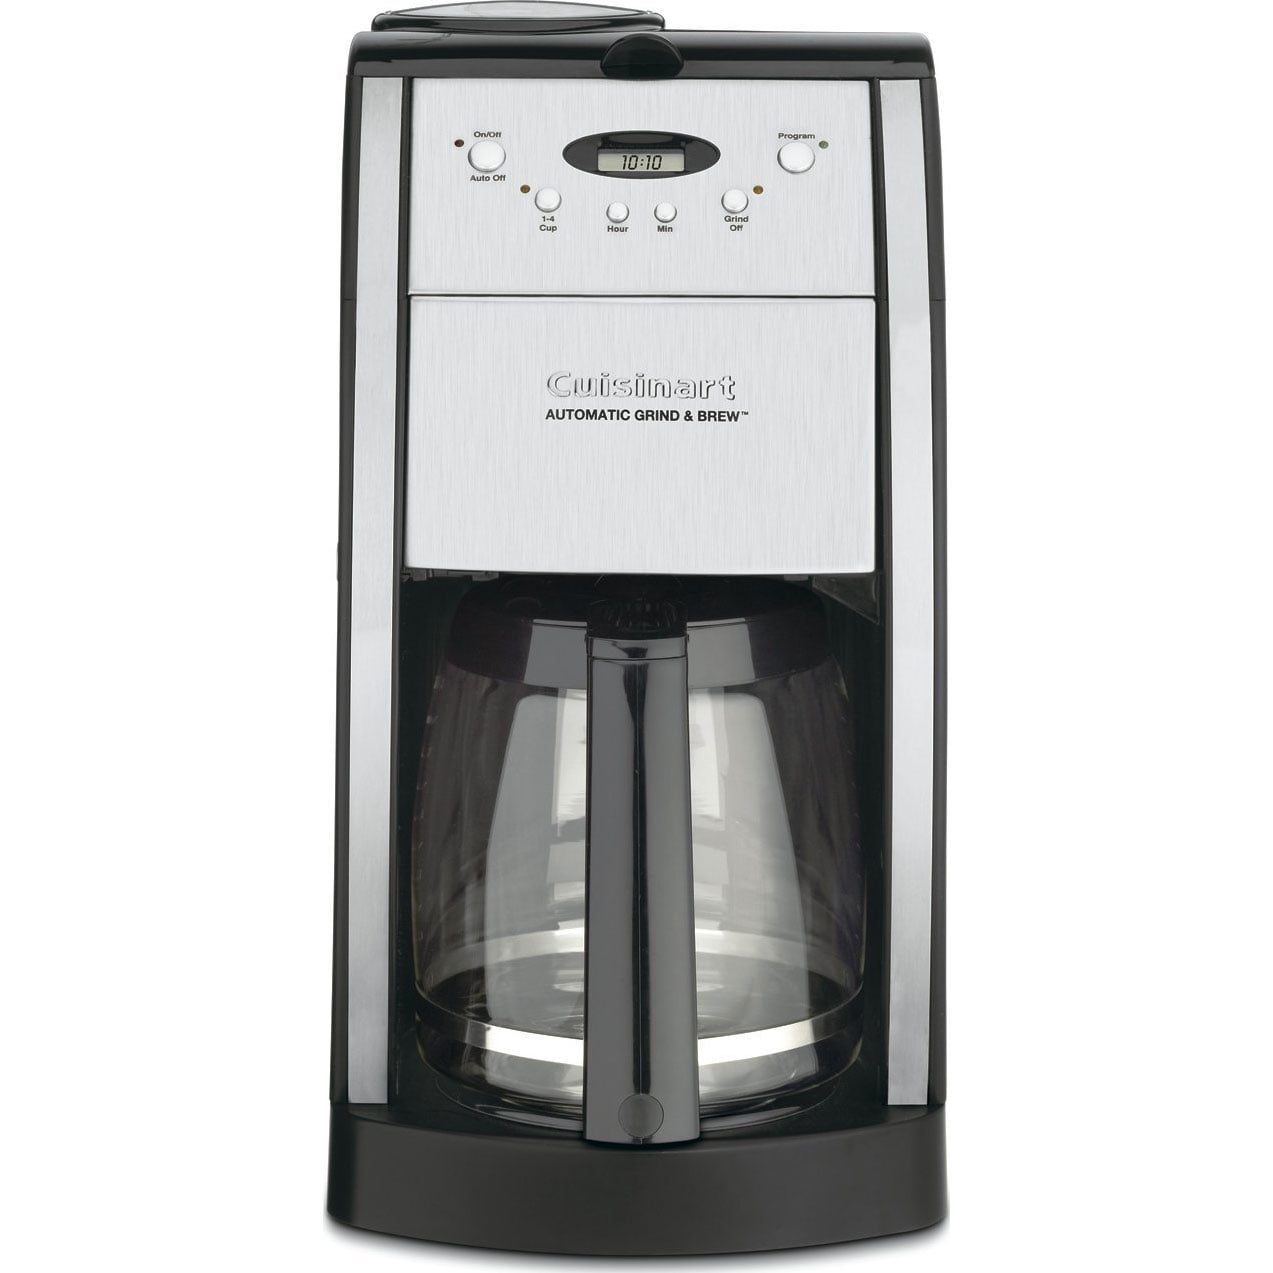 Cuisinart Burr Grind & Brew 12 Cup Coffeemaker DGB-1400BCPC New Sealed!